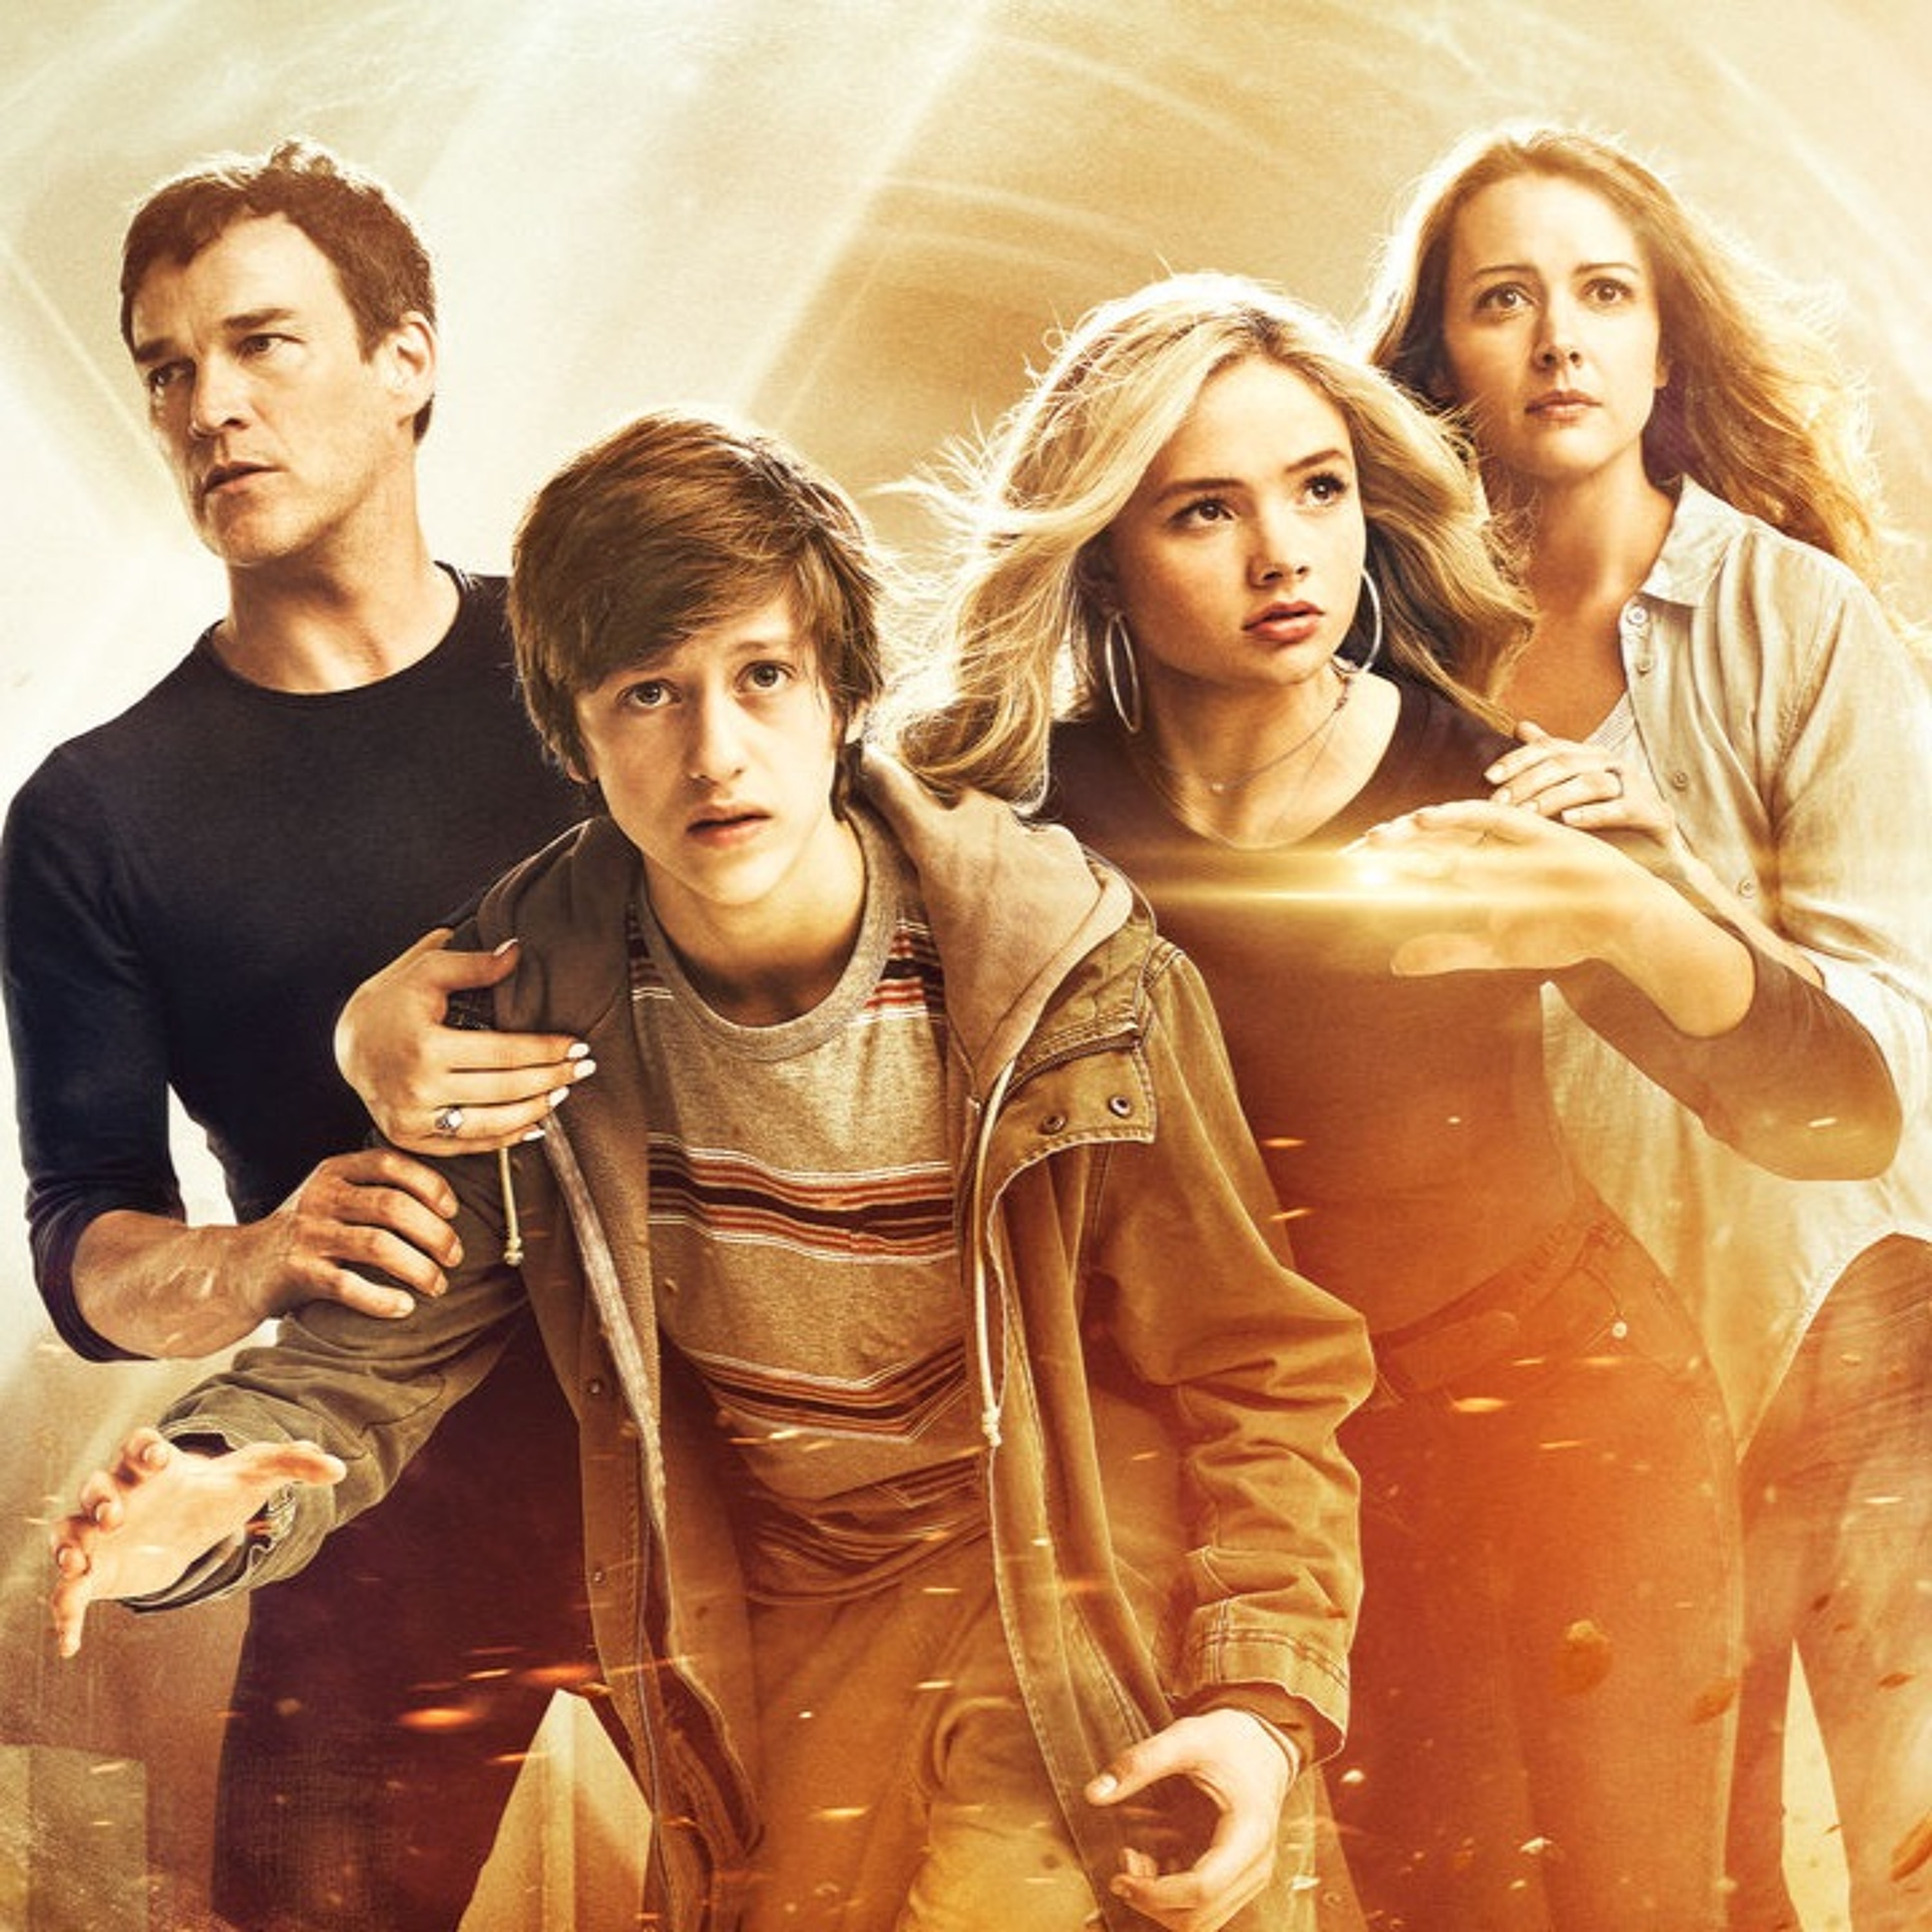 THE GIFTED: Season 1, Episode 4 - 